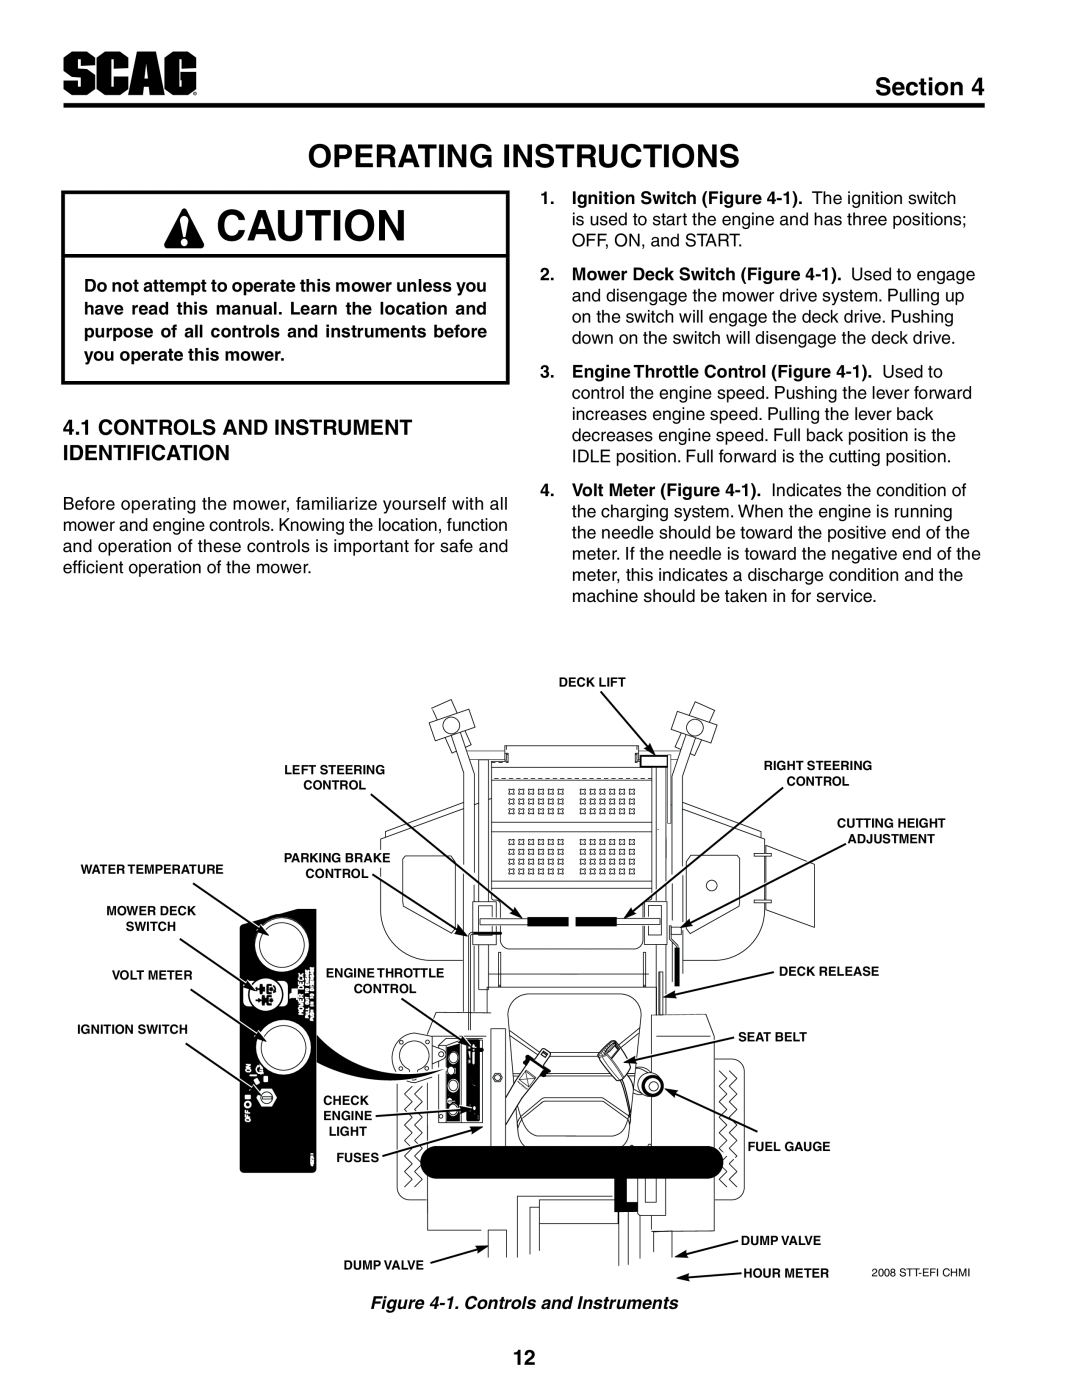 Scag Power Equipment STT-31EFI-SS Operating Instructions, Controls And Instrument Identification, Section 